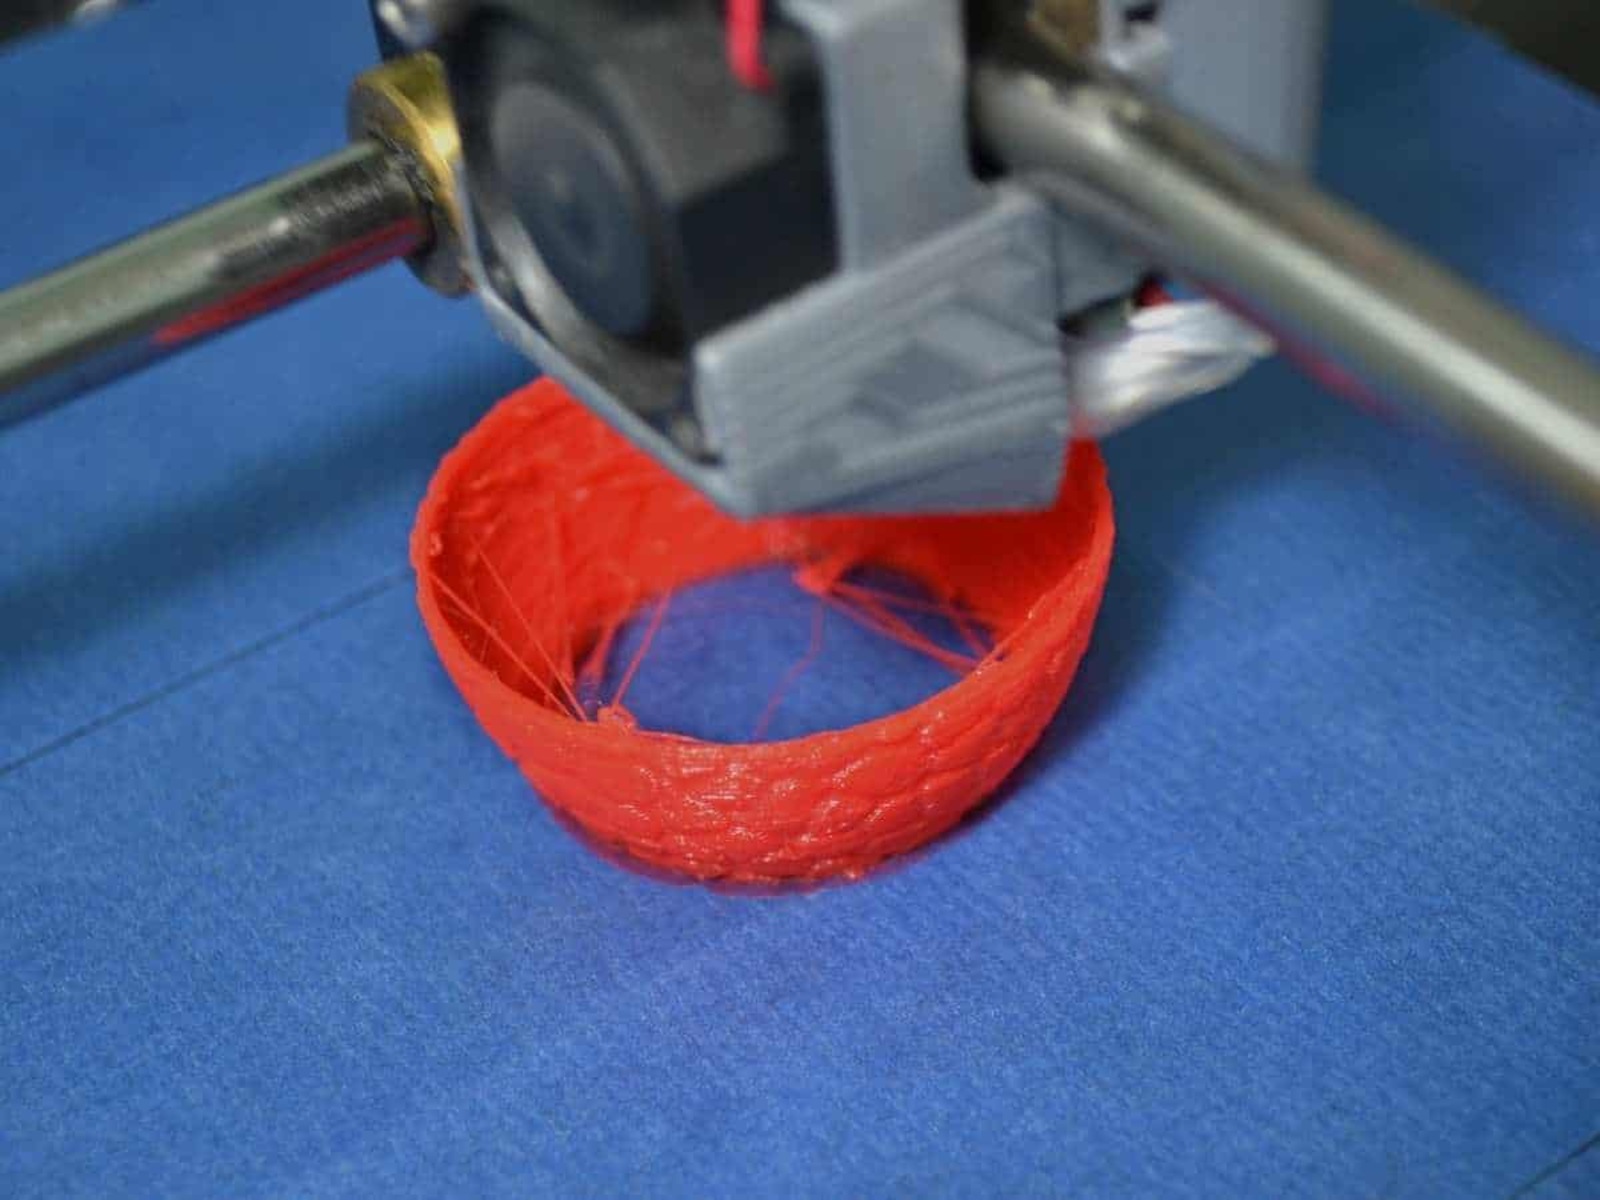 In A 3D Printer, What Is The Heated Nozzle Called